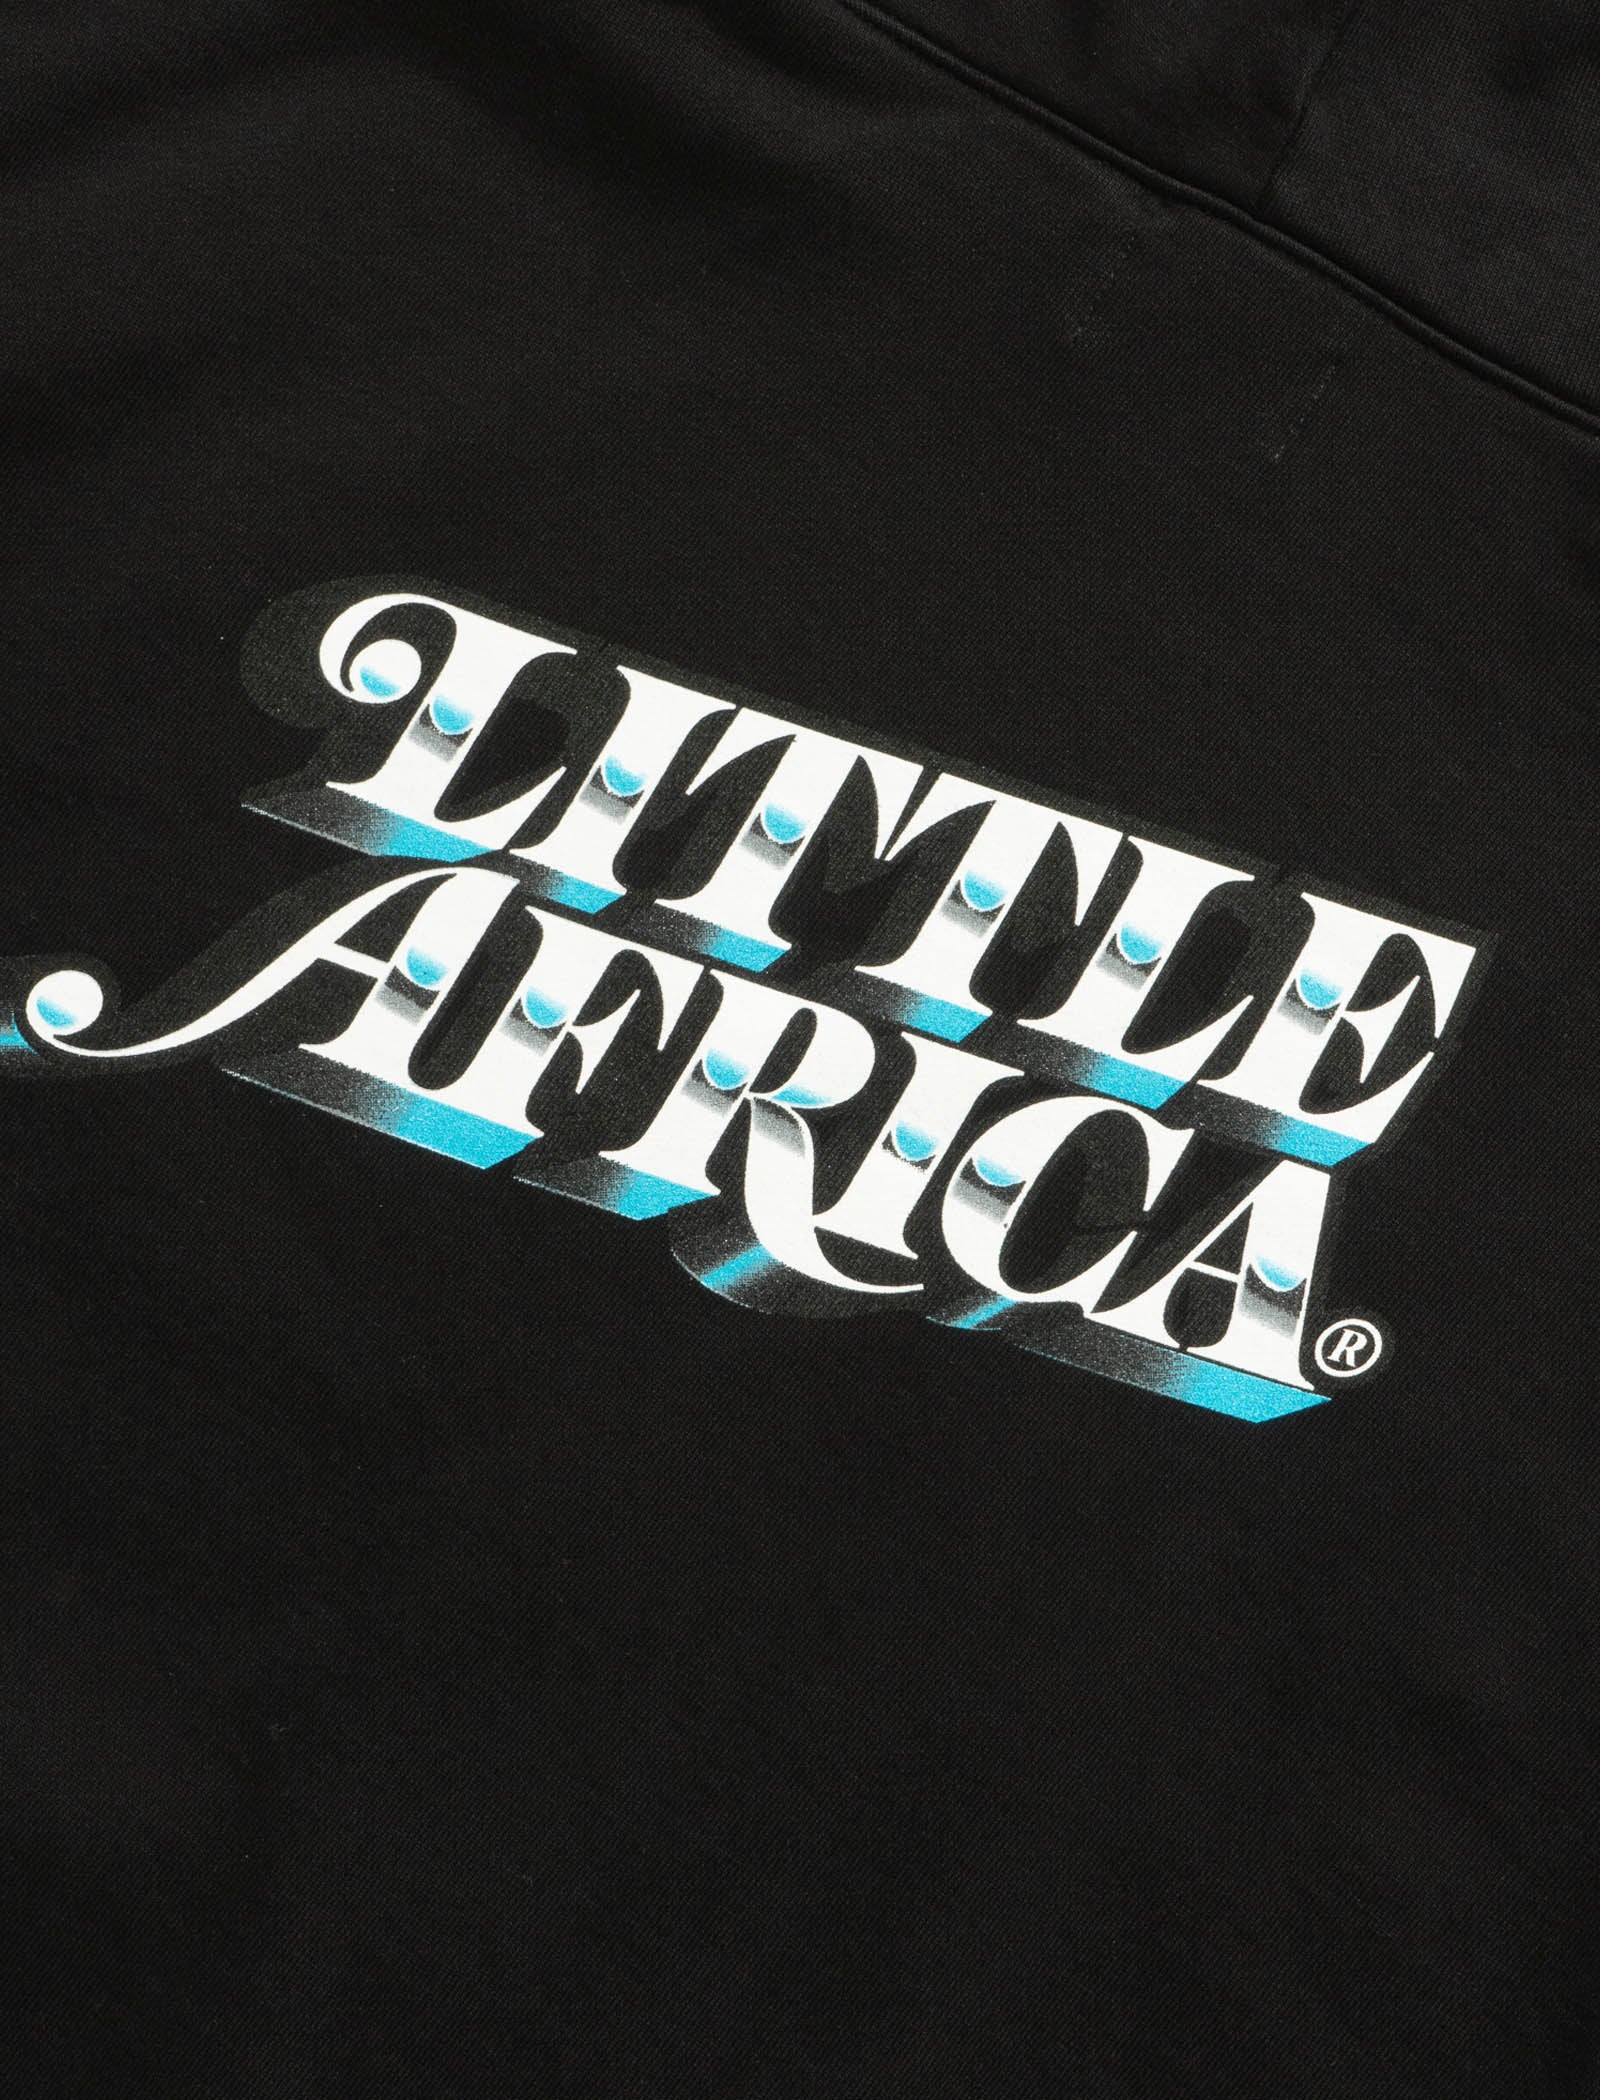 LITTLE AFRICA SOUL MADE HOODIE